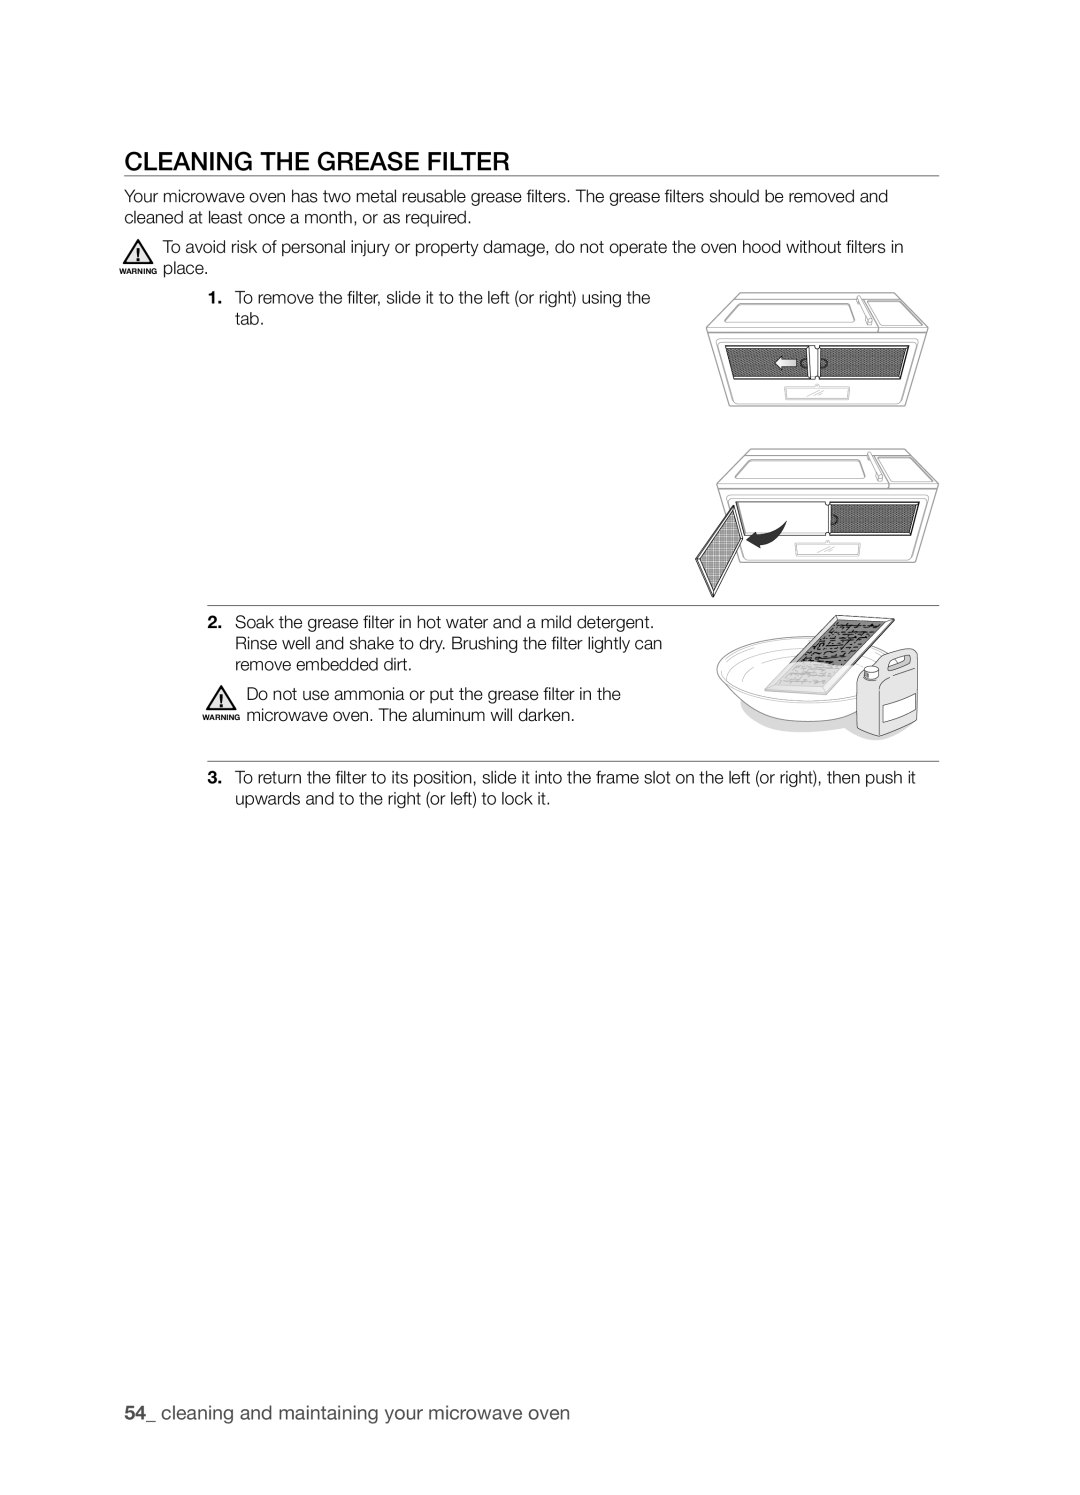 Samsung SMK9175ST user manual Cleaning the grease filter, cleaning and maintaining your microwave oven 